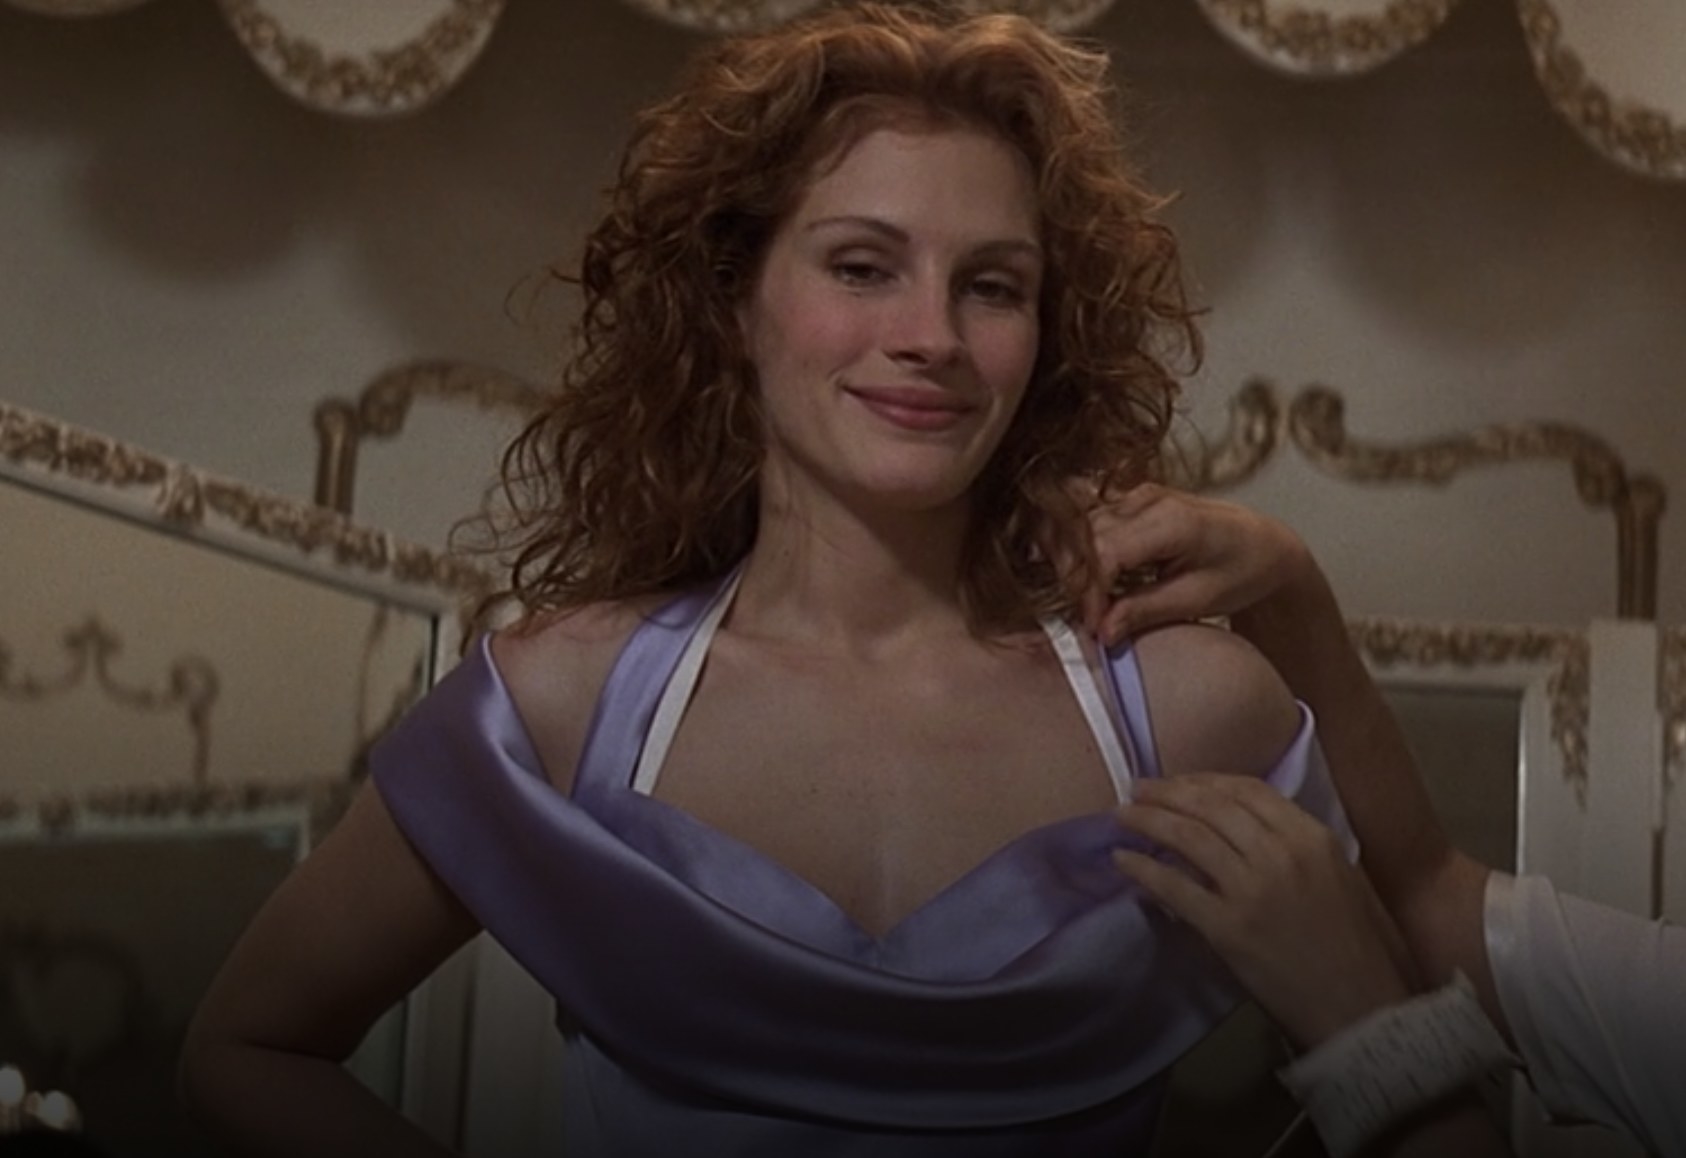 Actor Julia Roberts gets fitted for a purple gown and smiles.